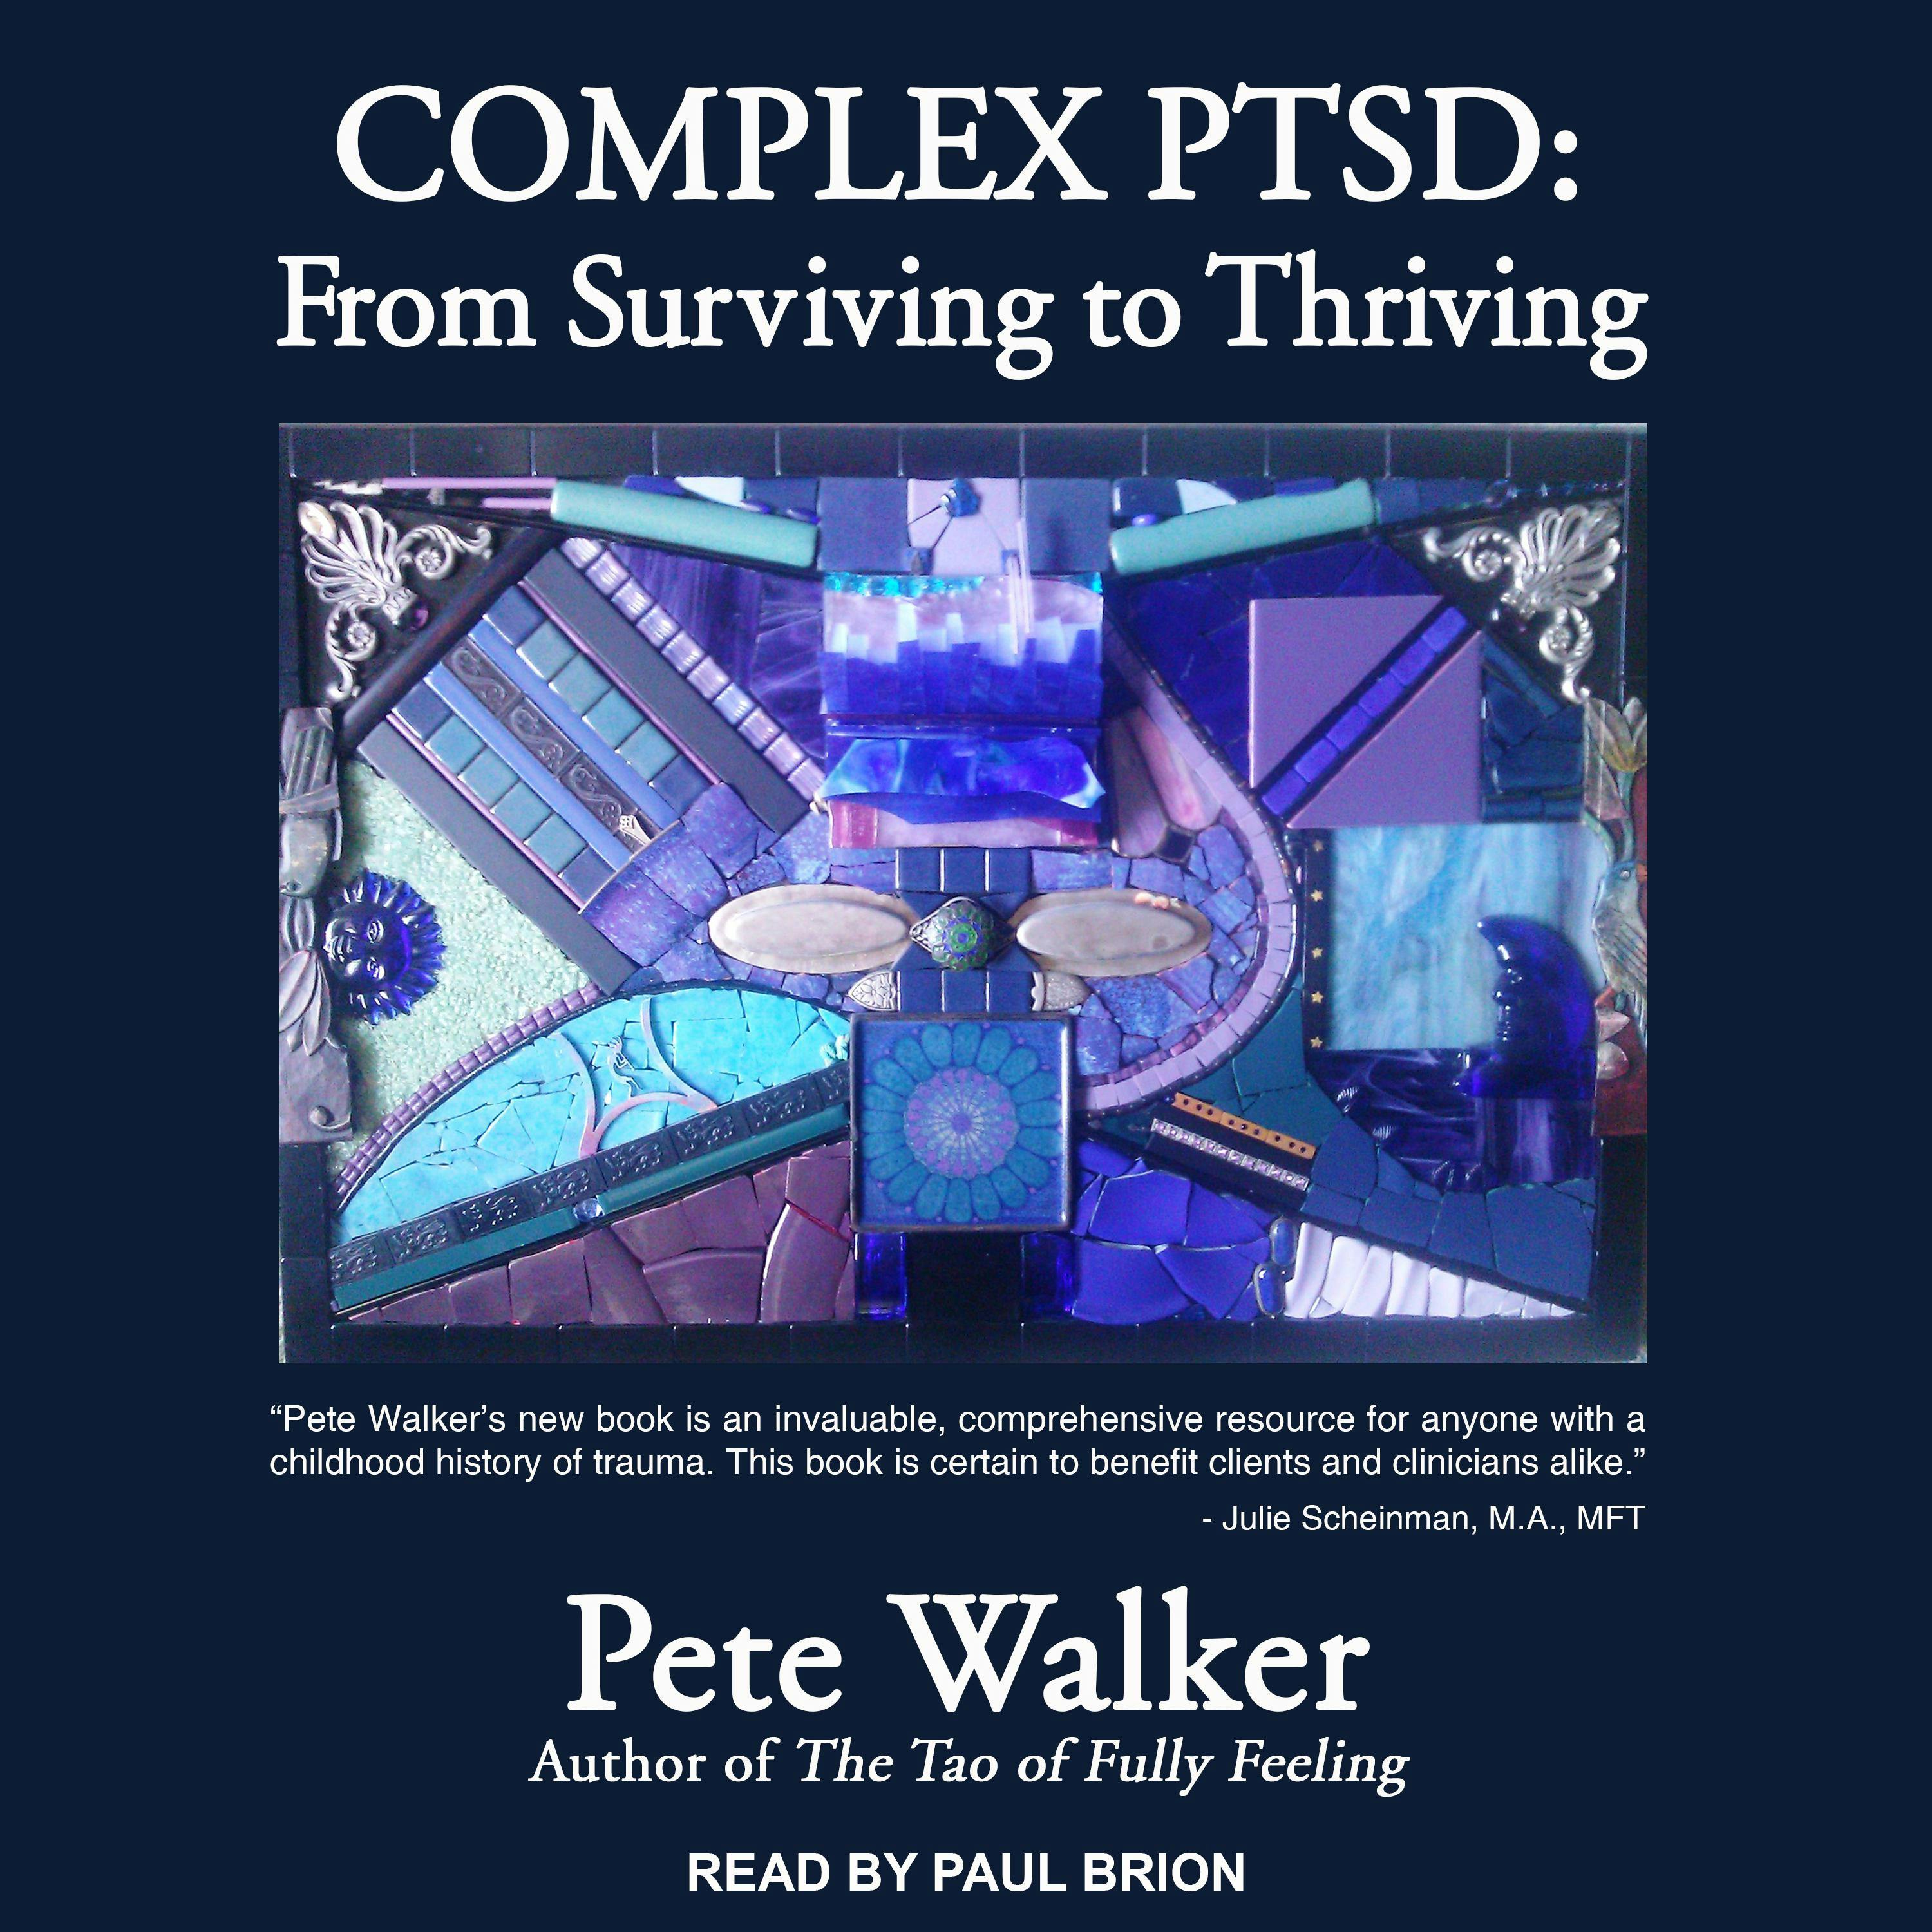 Complex PTSD: From Surviving to Thriving - Pete Walker